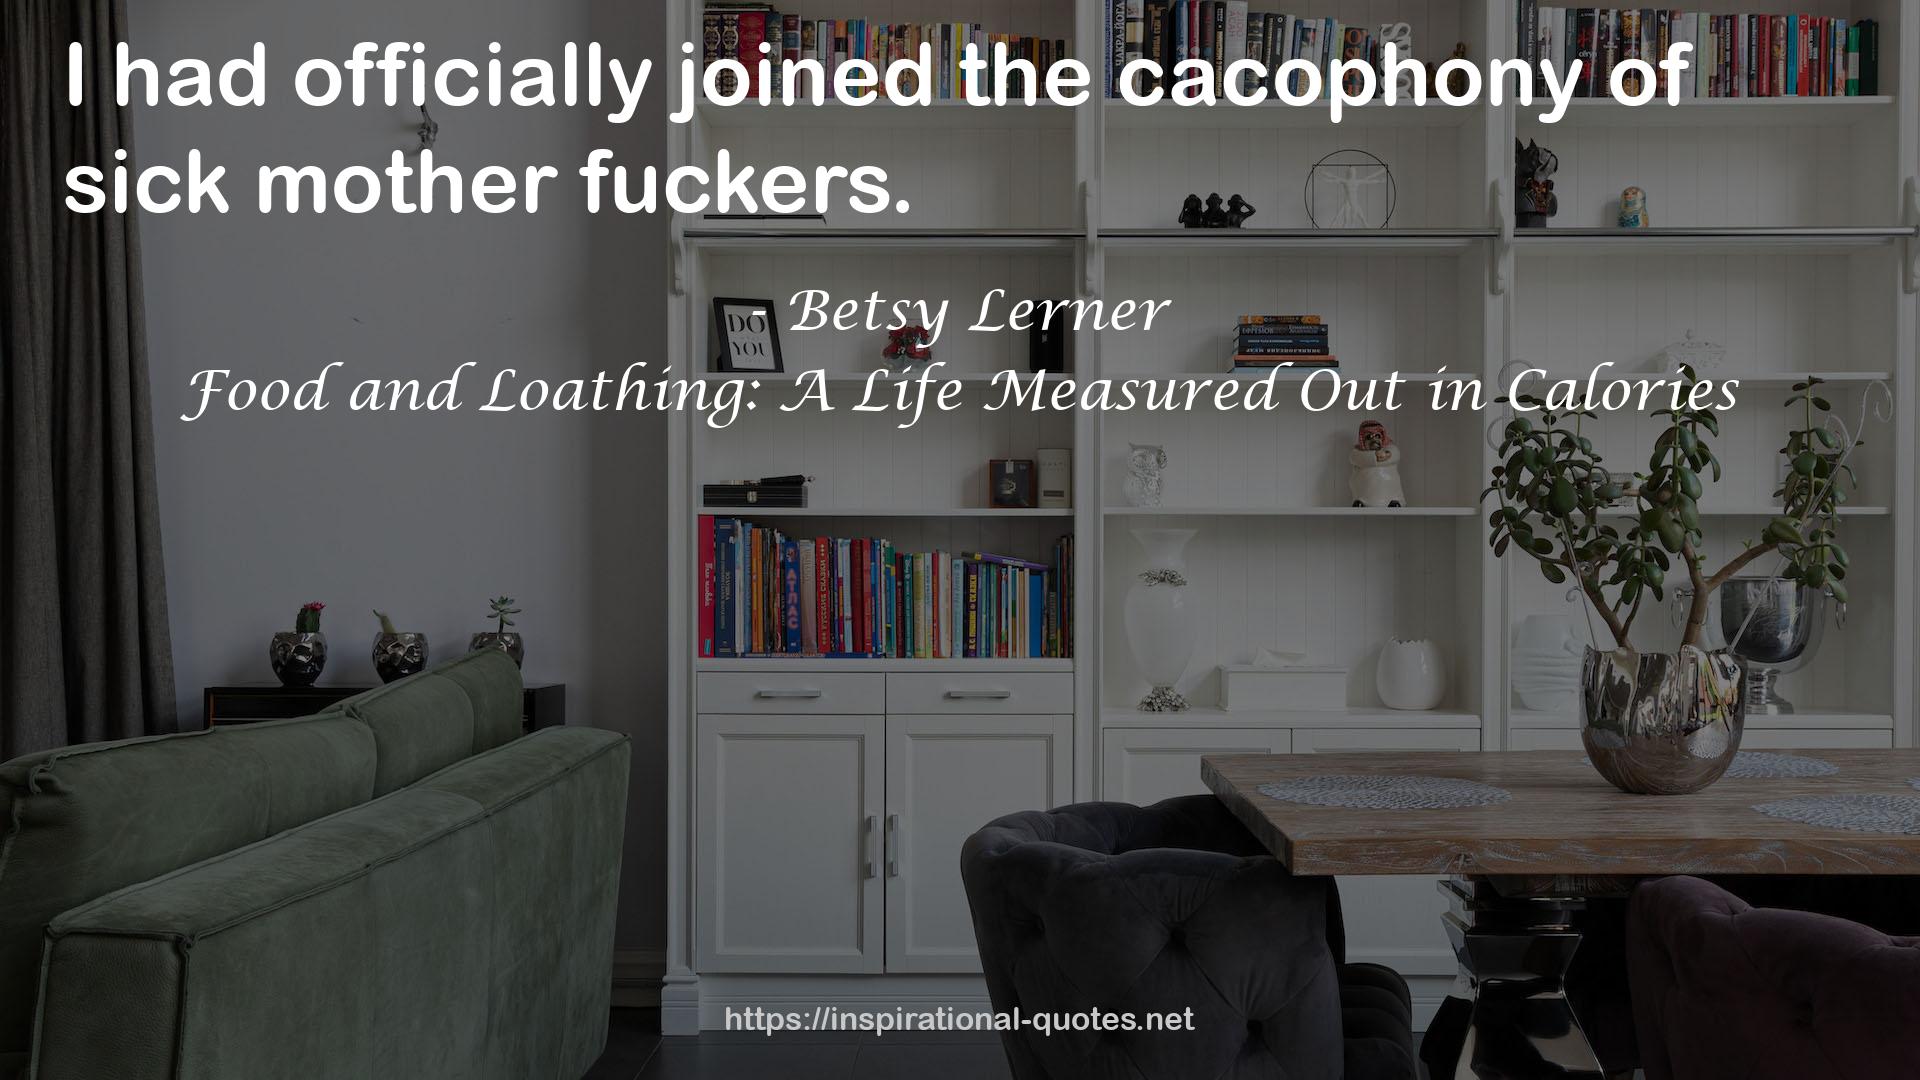 cacophony  QUOTES